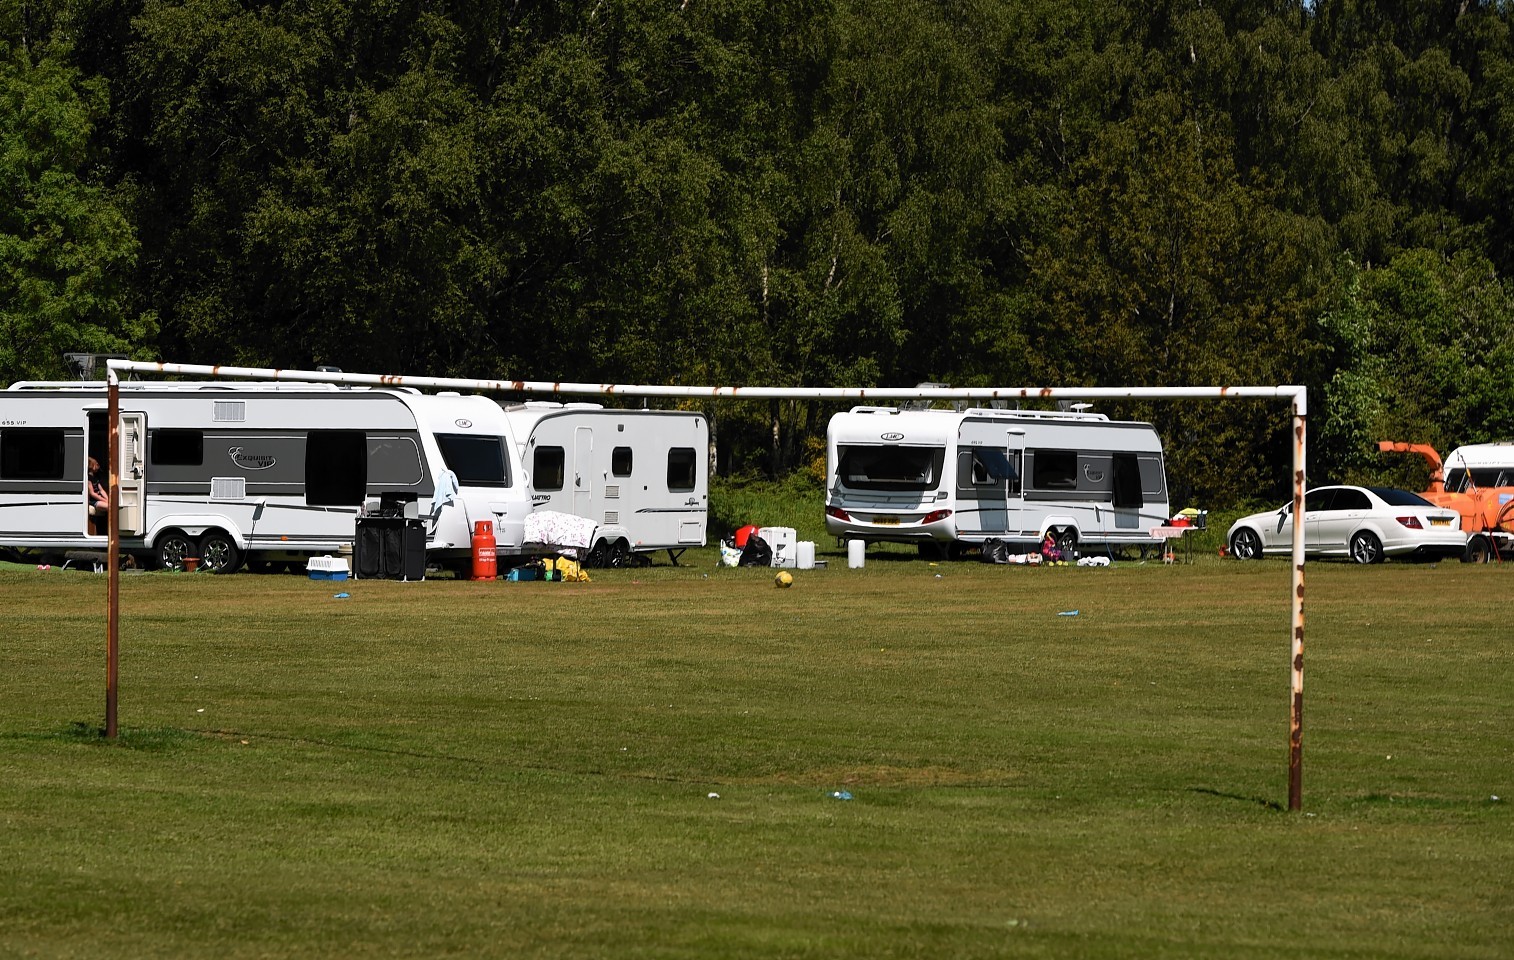 Travellers have pitched on playing fields owned by Aberdeenshire council at Glebe Park, Drumoak.